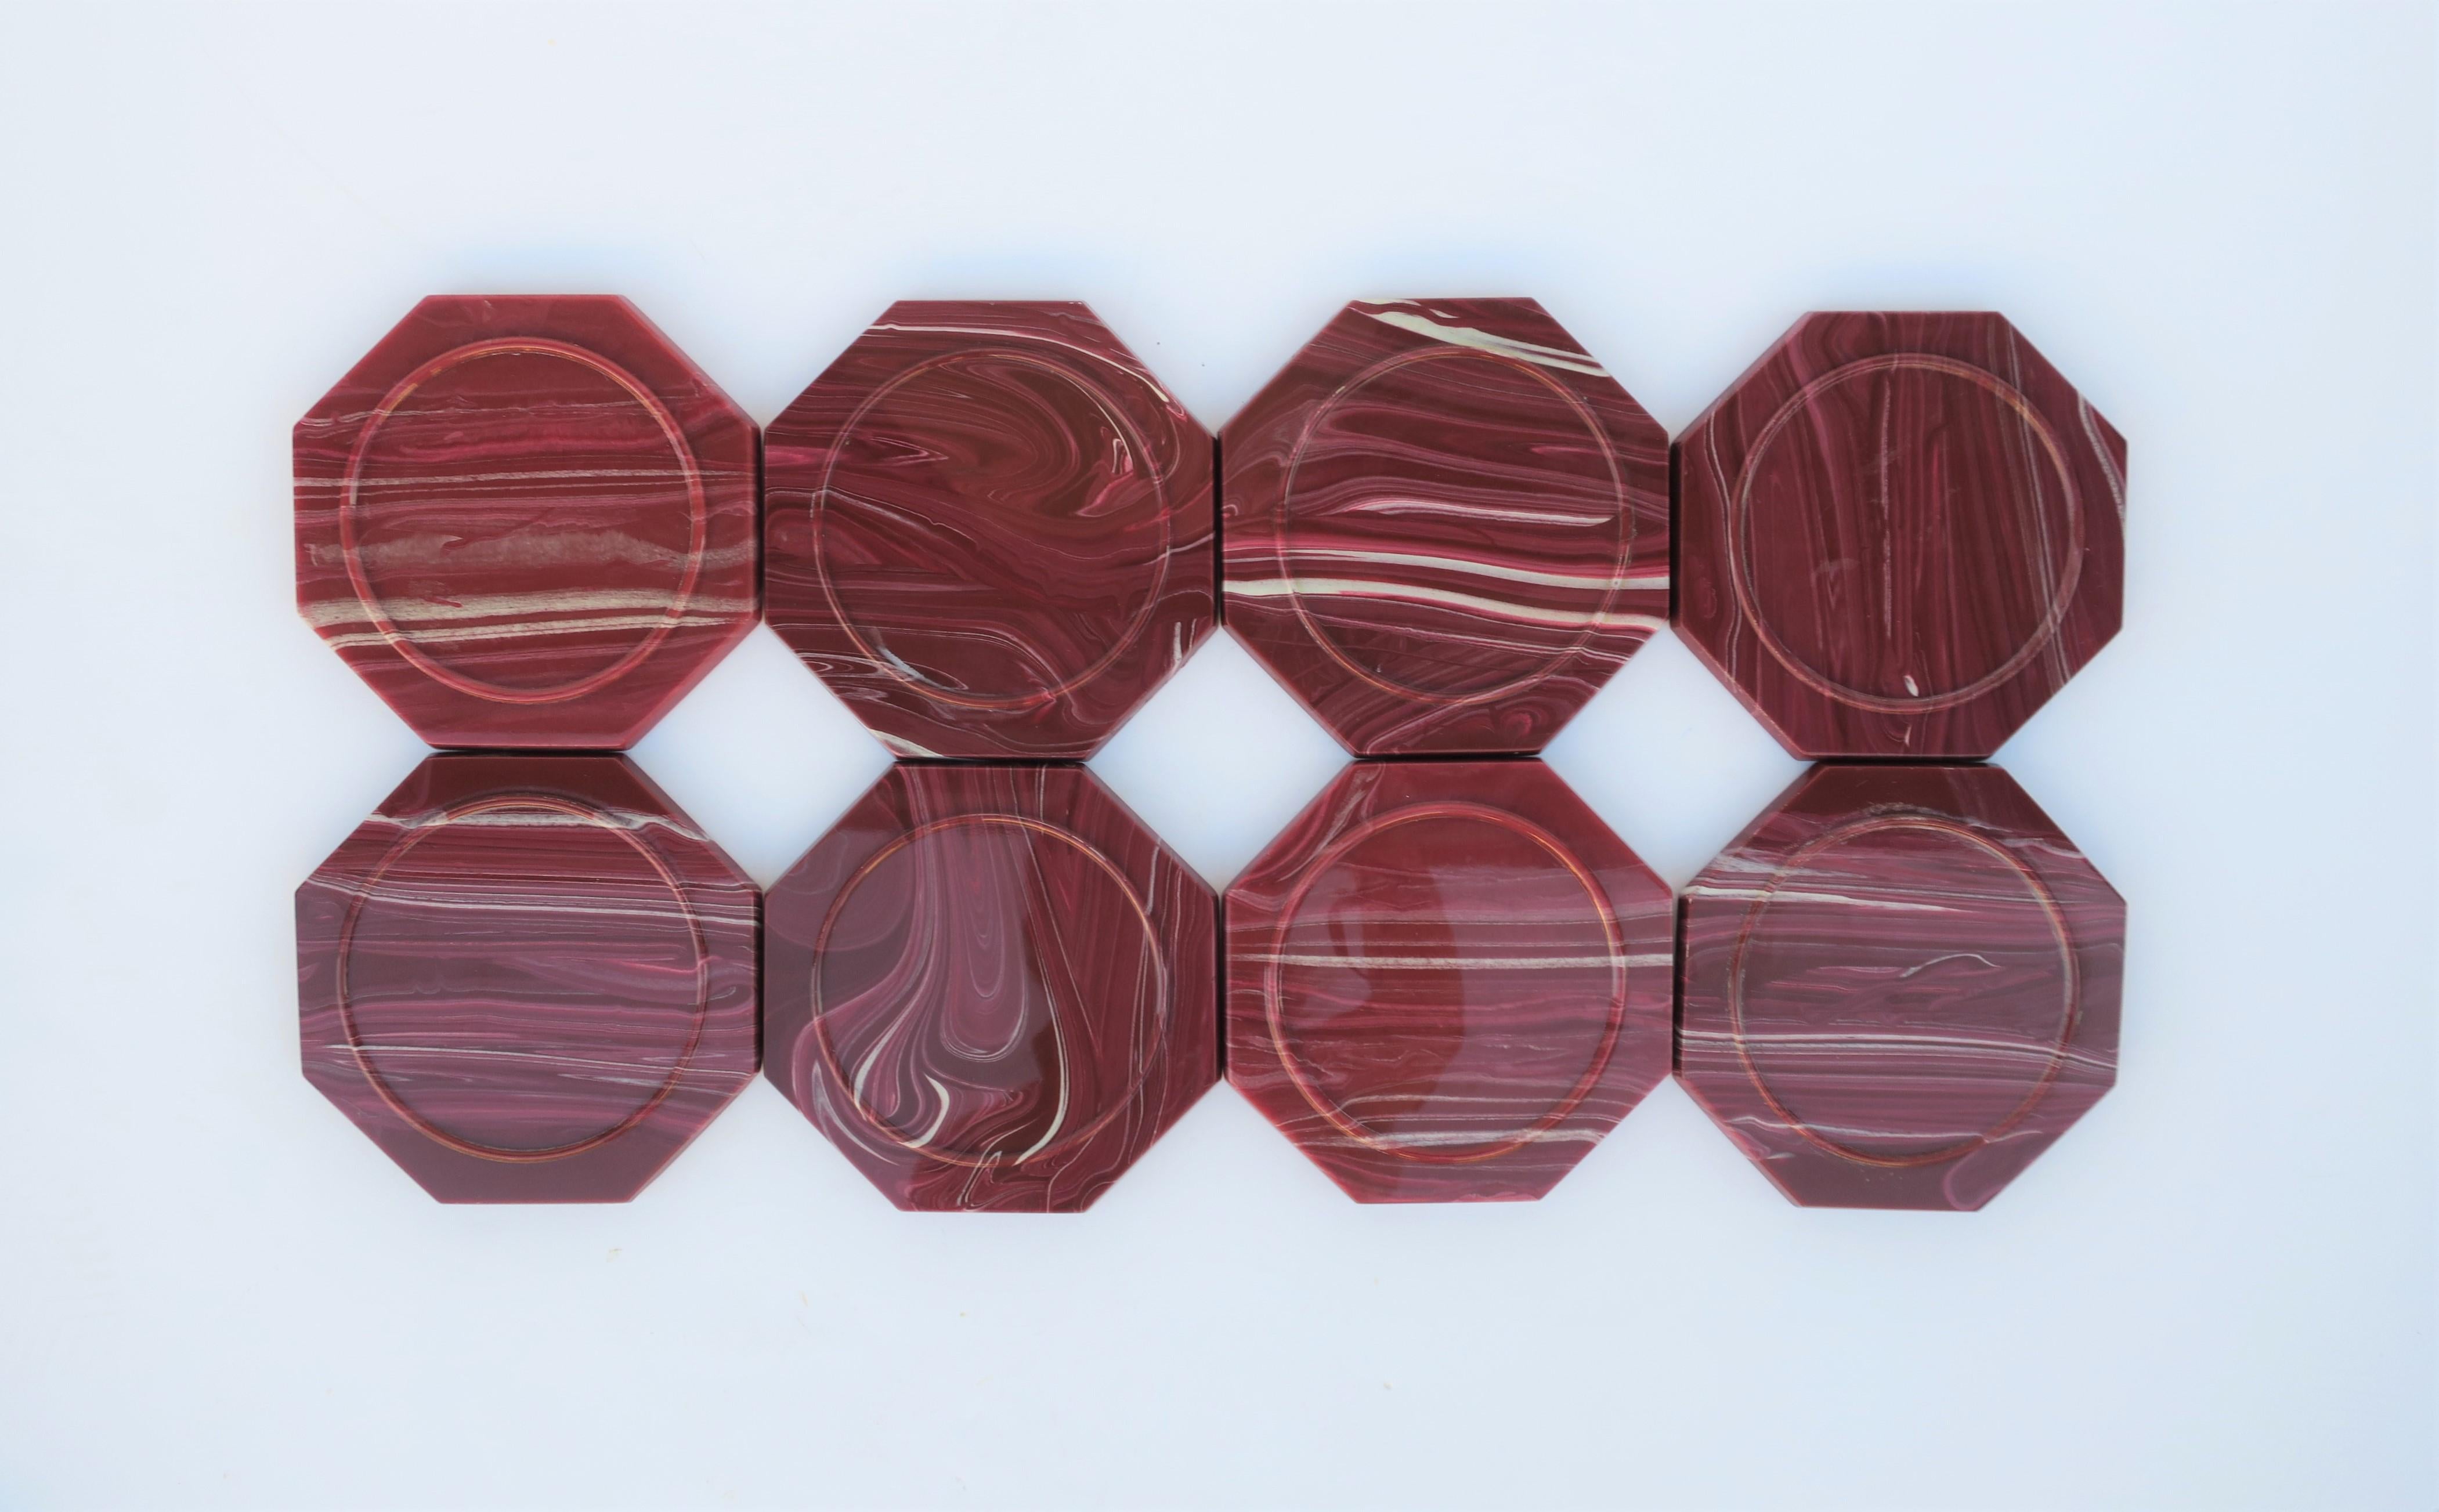 A chic set of 8 vintage onyx marble style octagonal acrylic/resin wine or cocktail coasters, circa 1970s. Coaters are resin/acrylic with a design style that resembles onyx or agate marble stone. Colors include a red burgundy/aubergine/maroon and